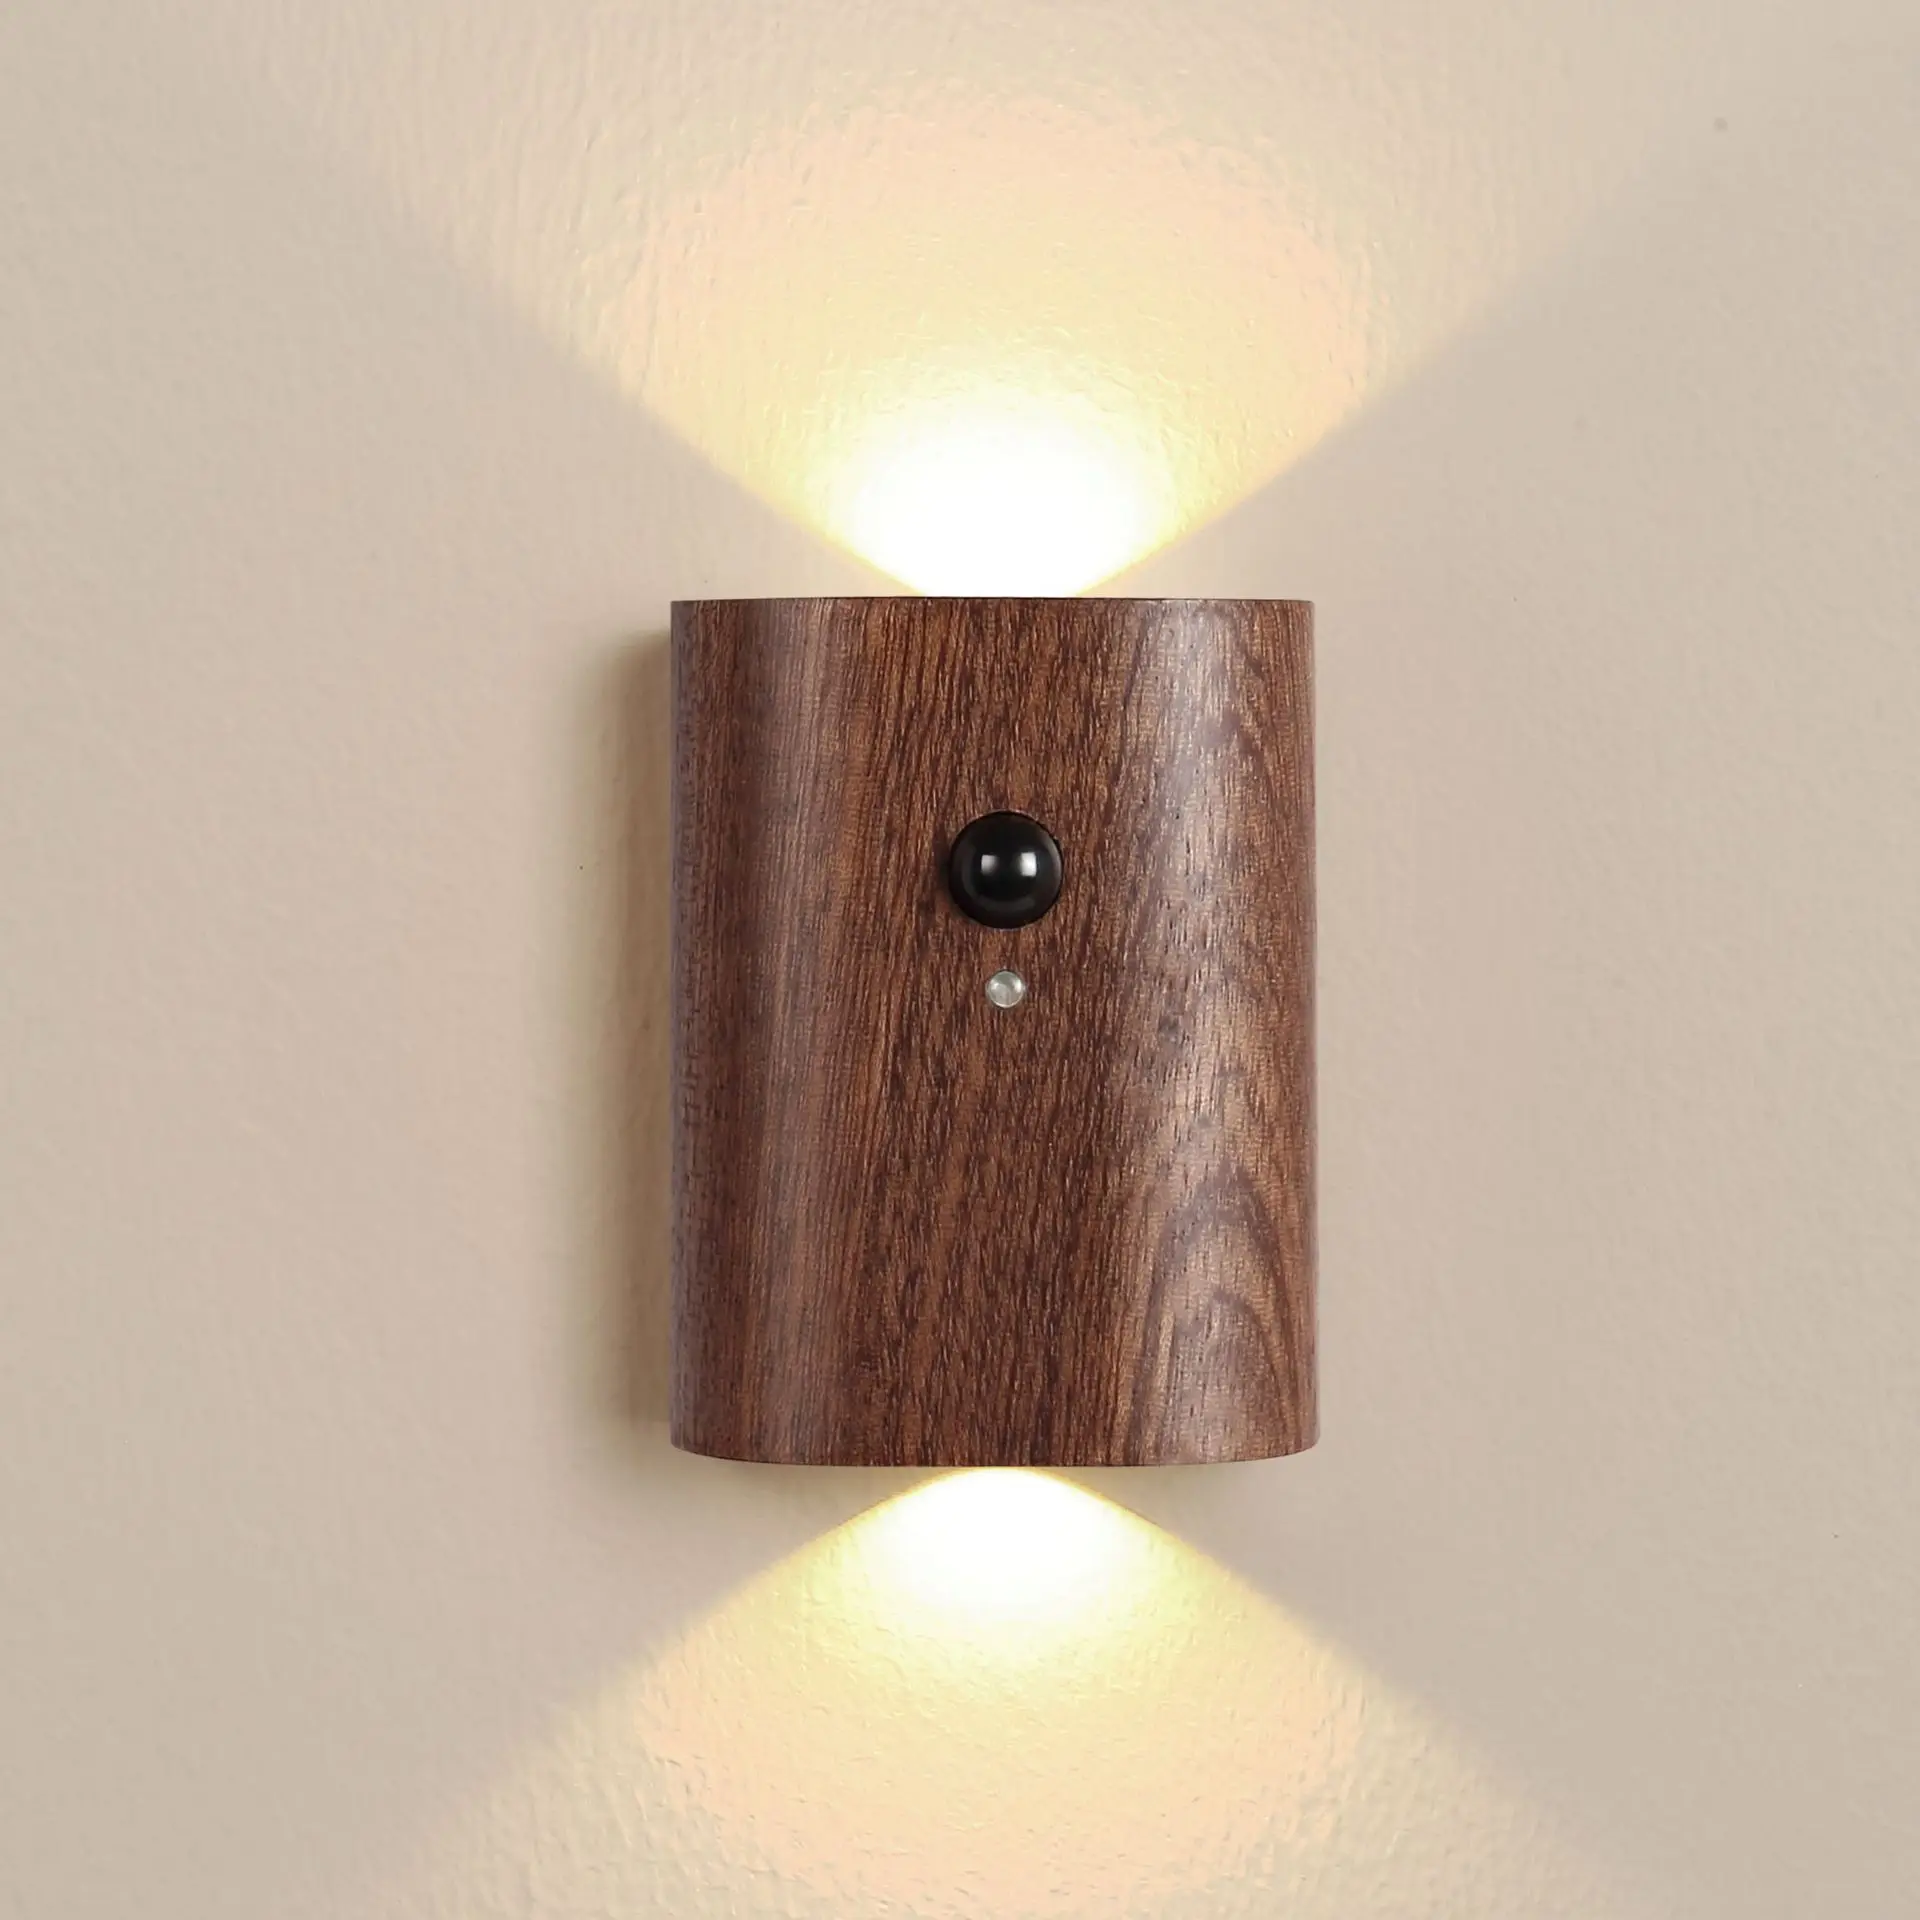 

LED Motion Sensor Induction Night Lights Wooden Wireless USB Rechargeable Wall Lamp for Bedroom Kitchen Corridor Stairs Lighting